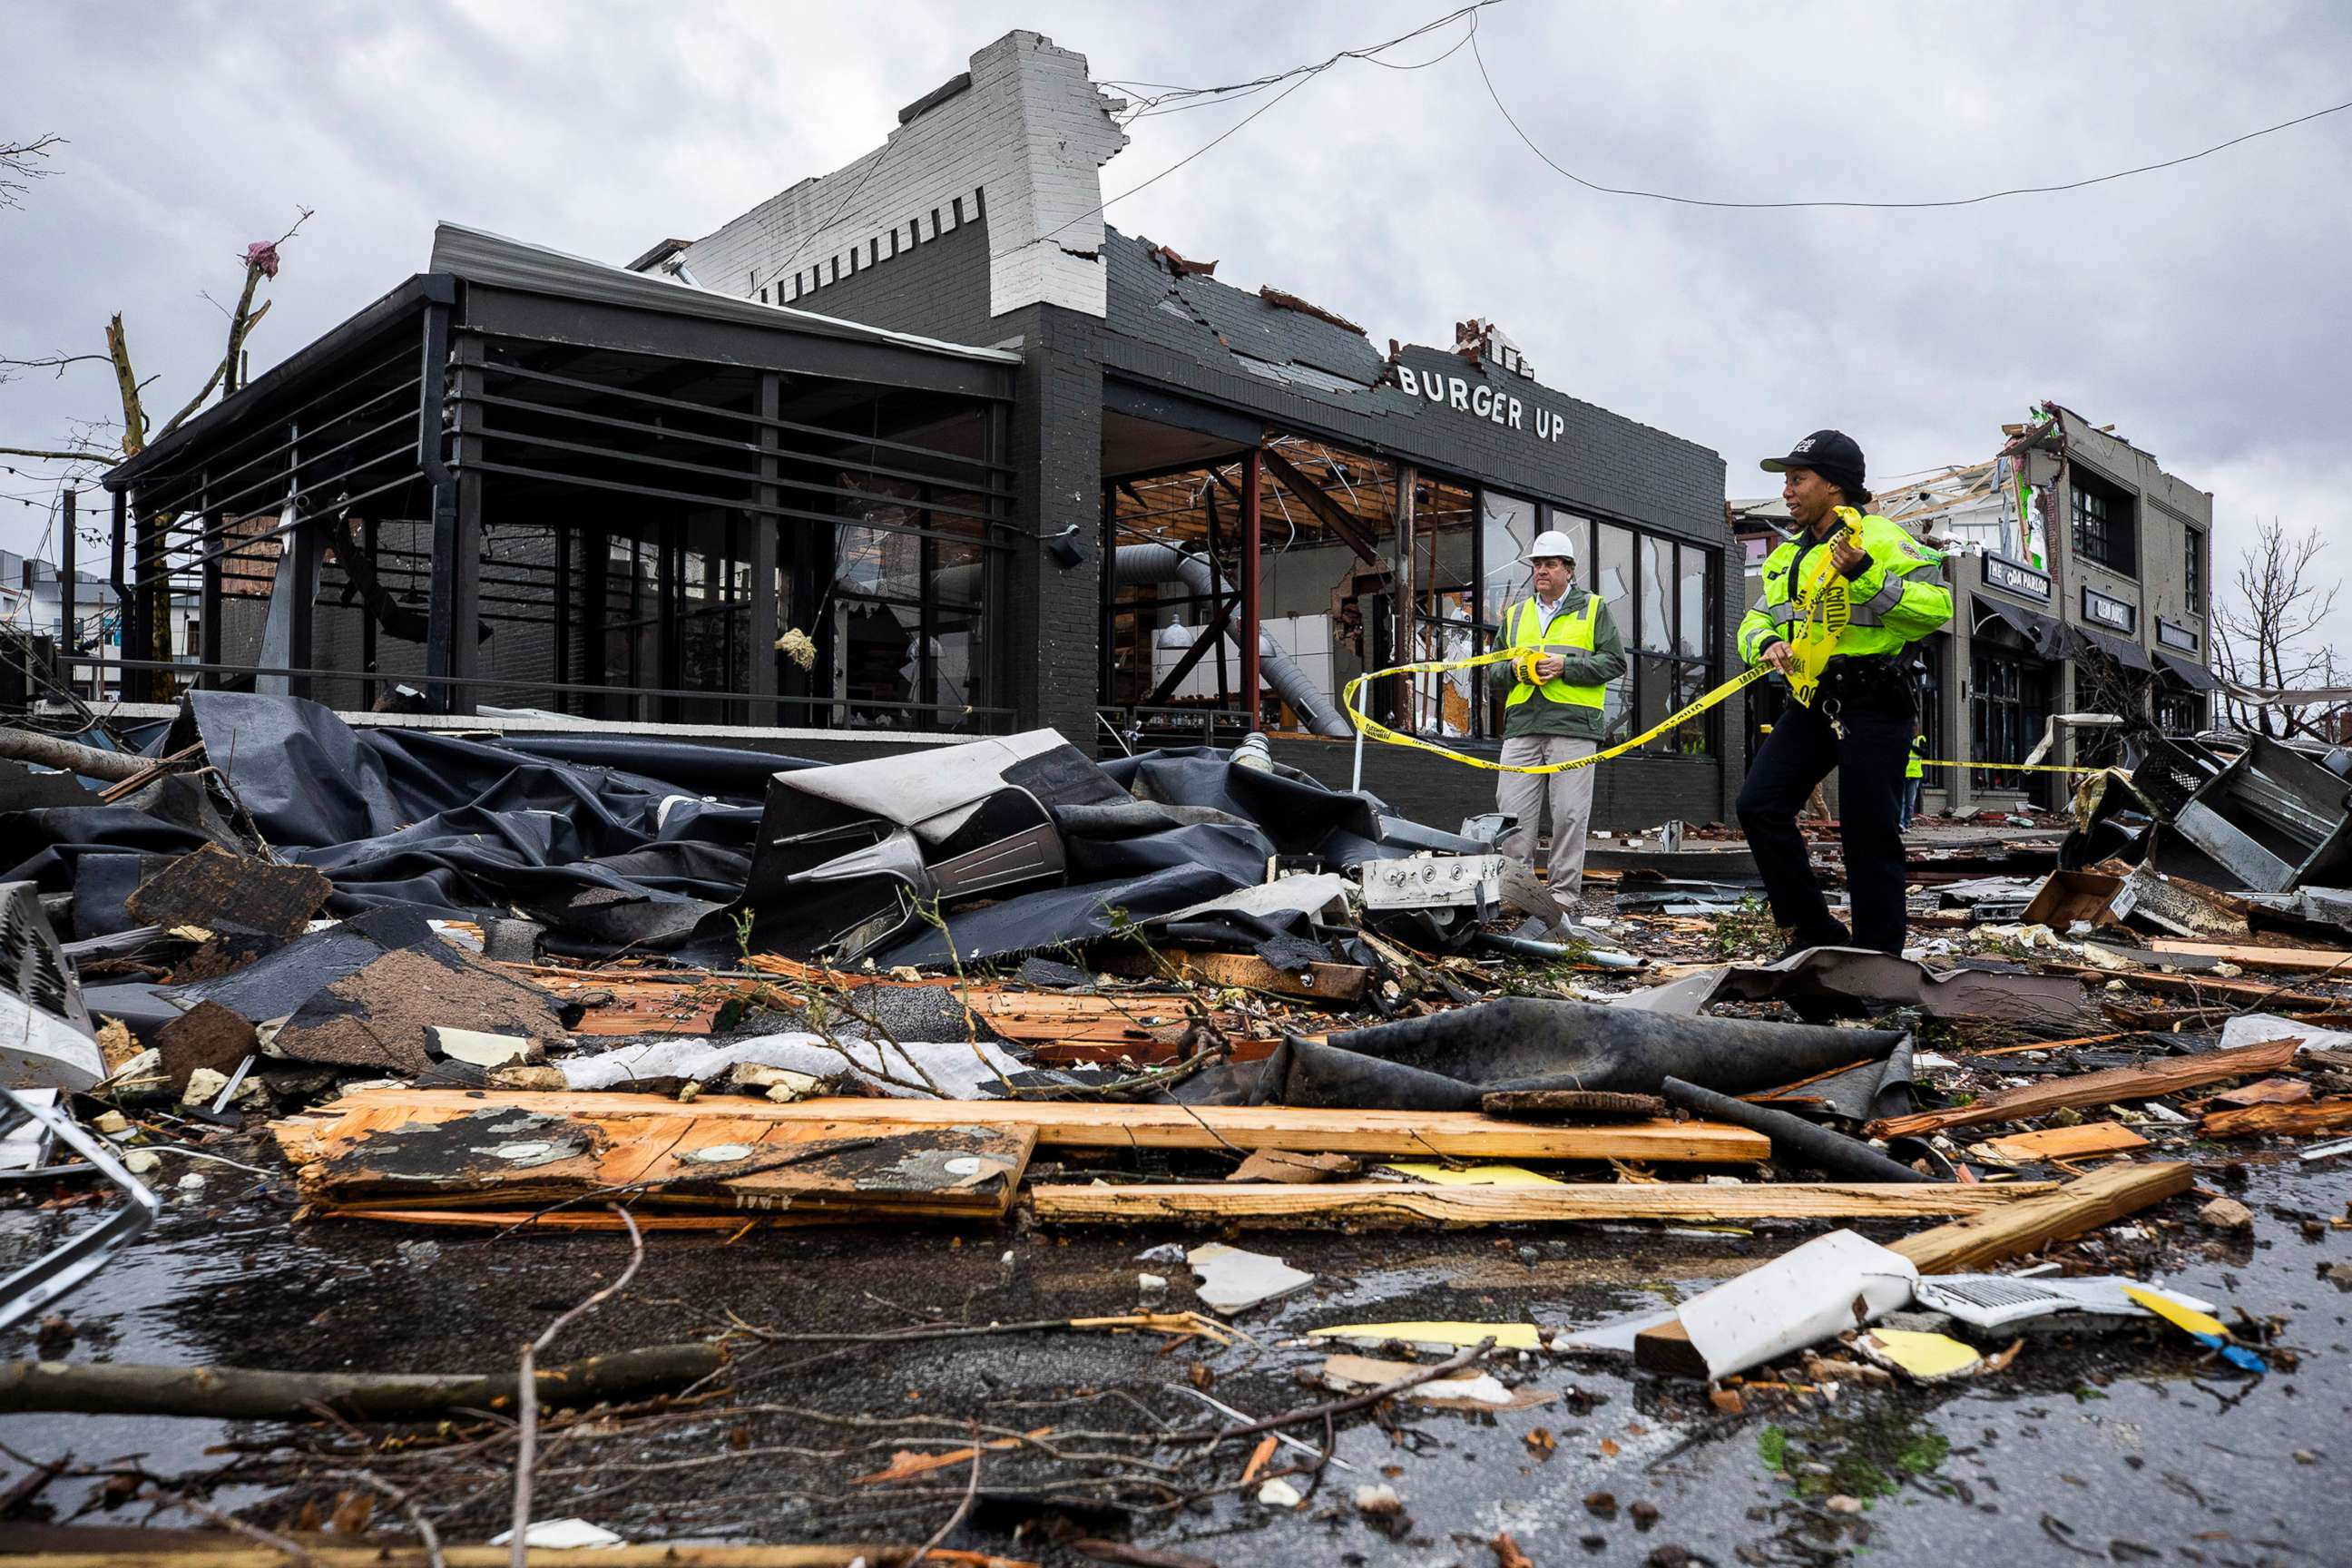 PHOTO: Police at the scene of a damage caused by a tornado in Nashville, Tenn., March 3, 2020.  